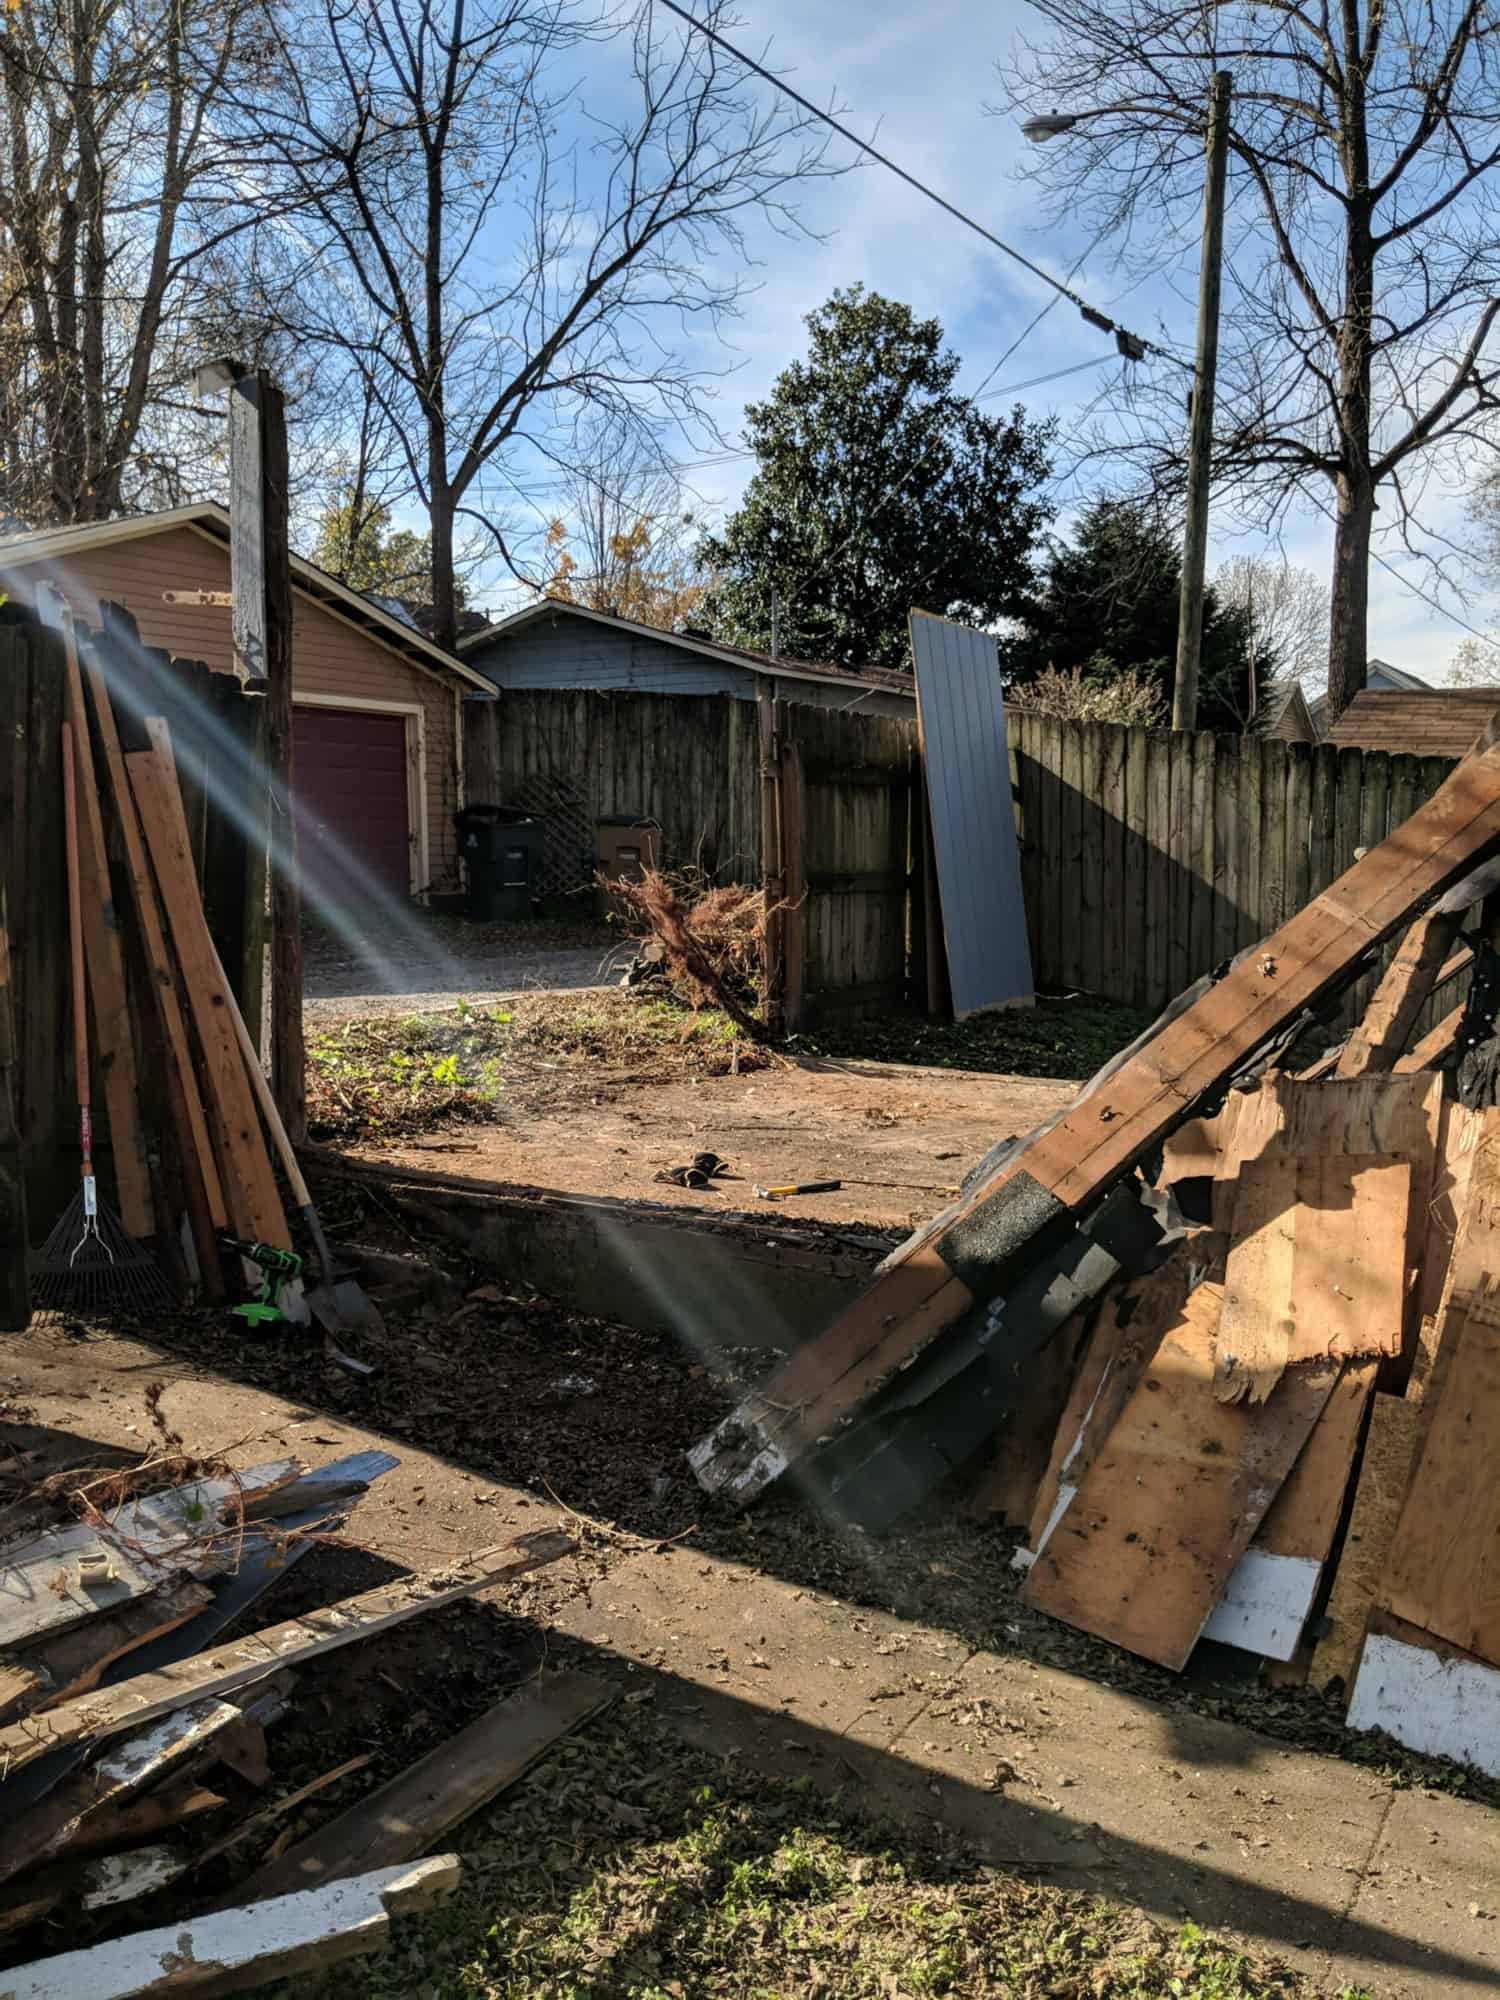 torn down blue shed by a wooden fence in a backyard